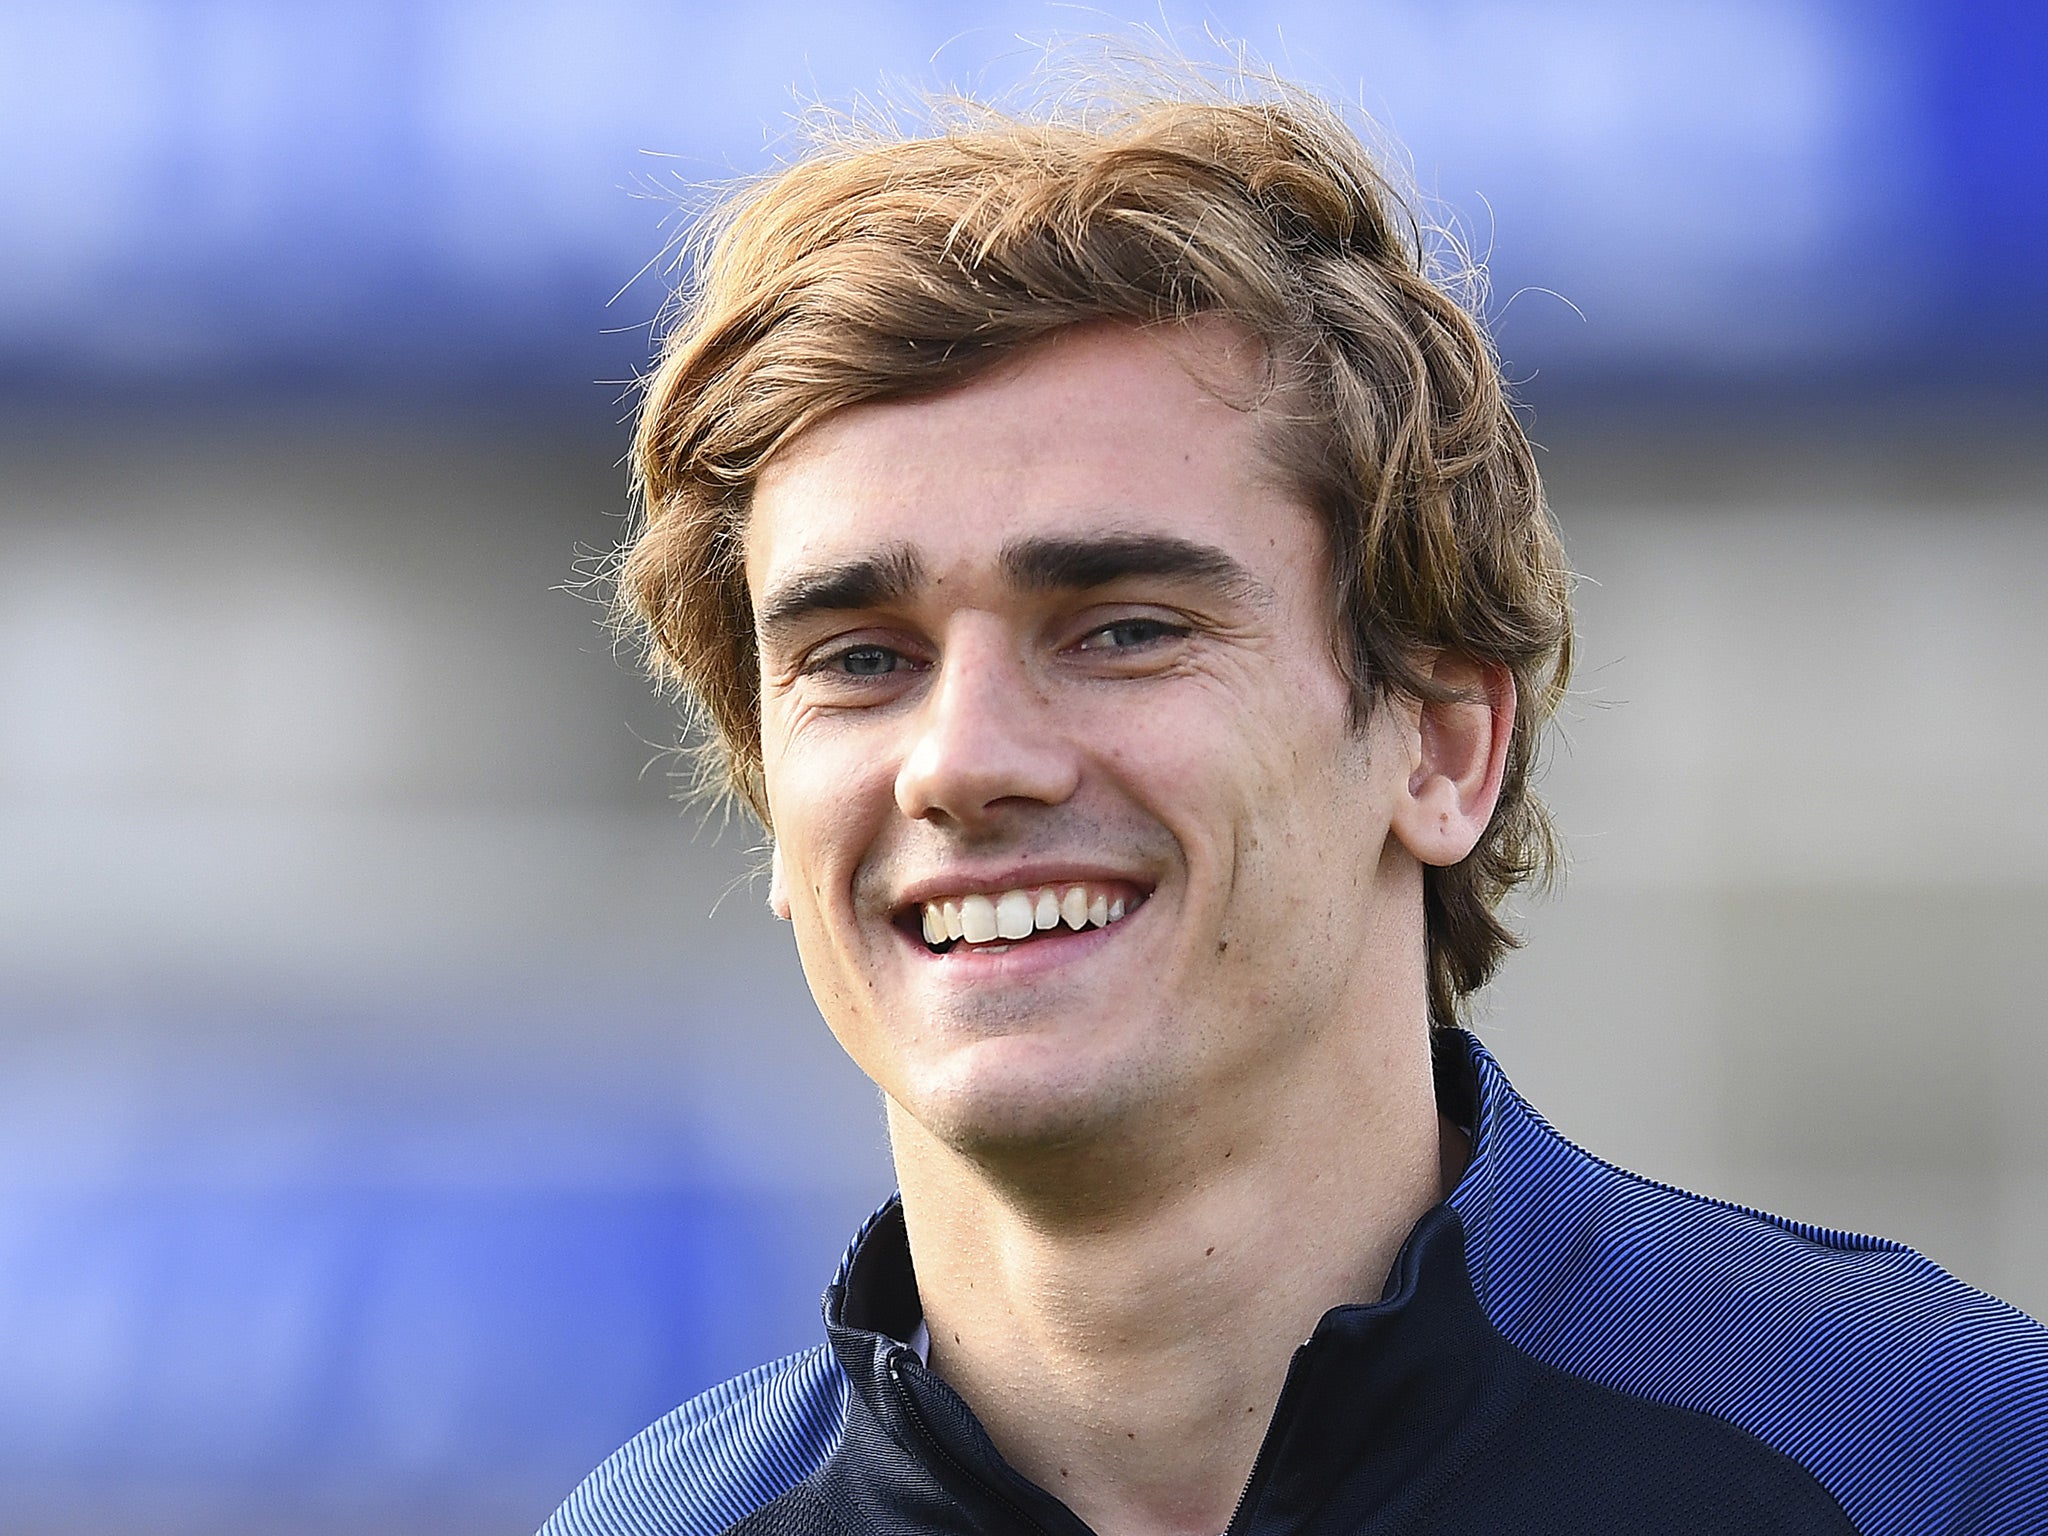 In this tutorial we show you how to get a antoine griezmann inspired hairst...